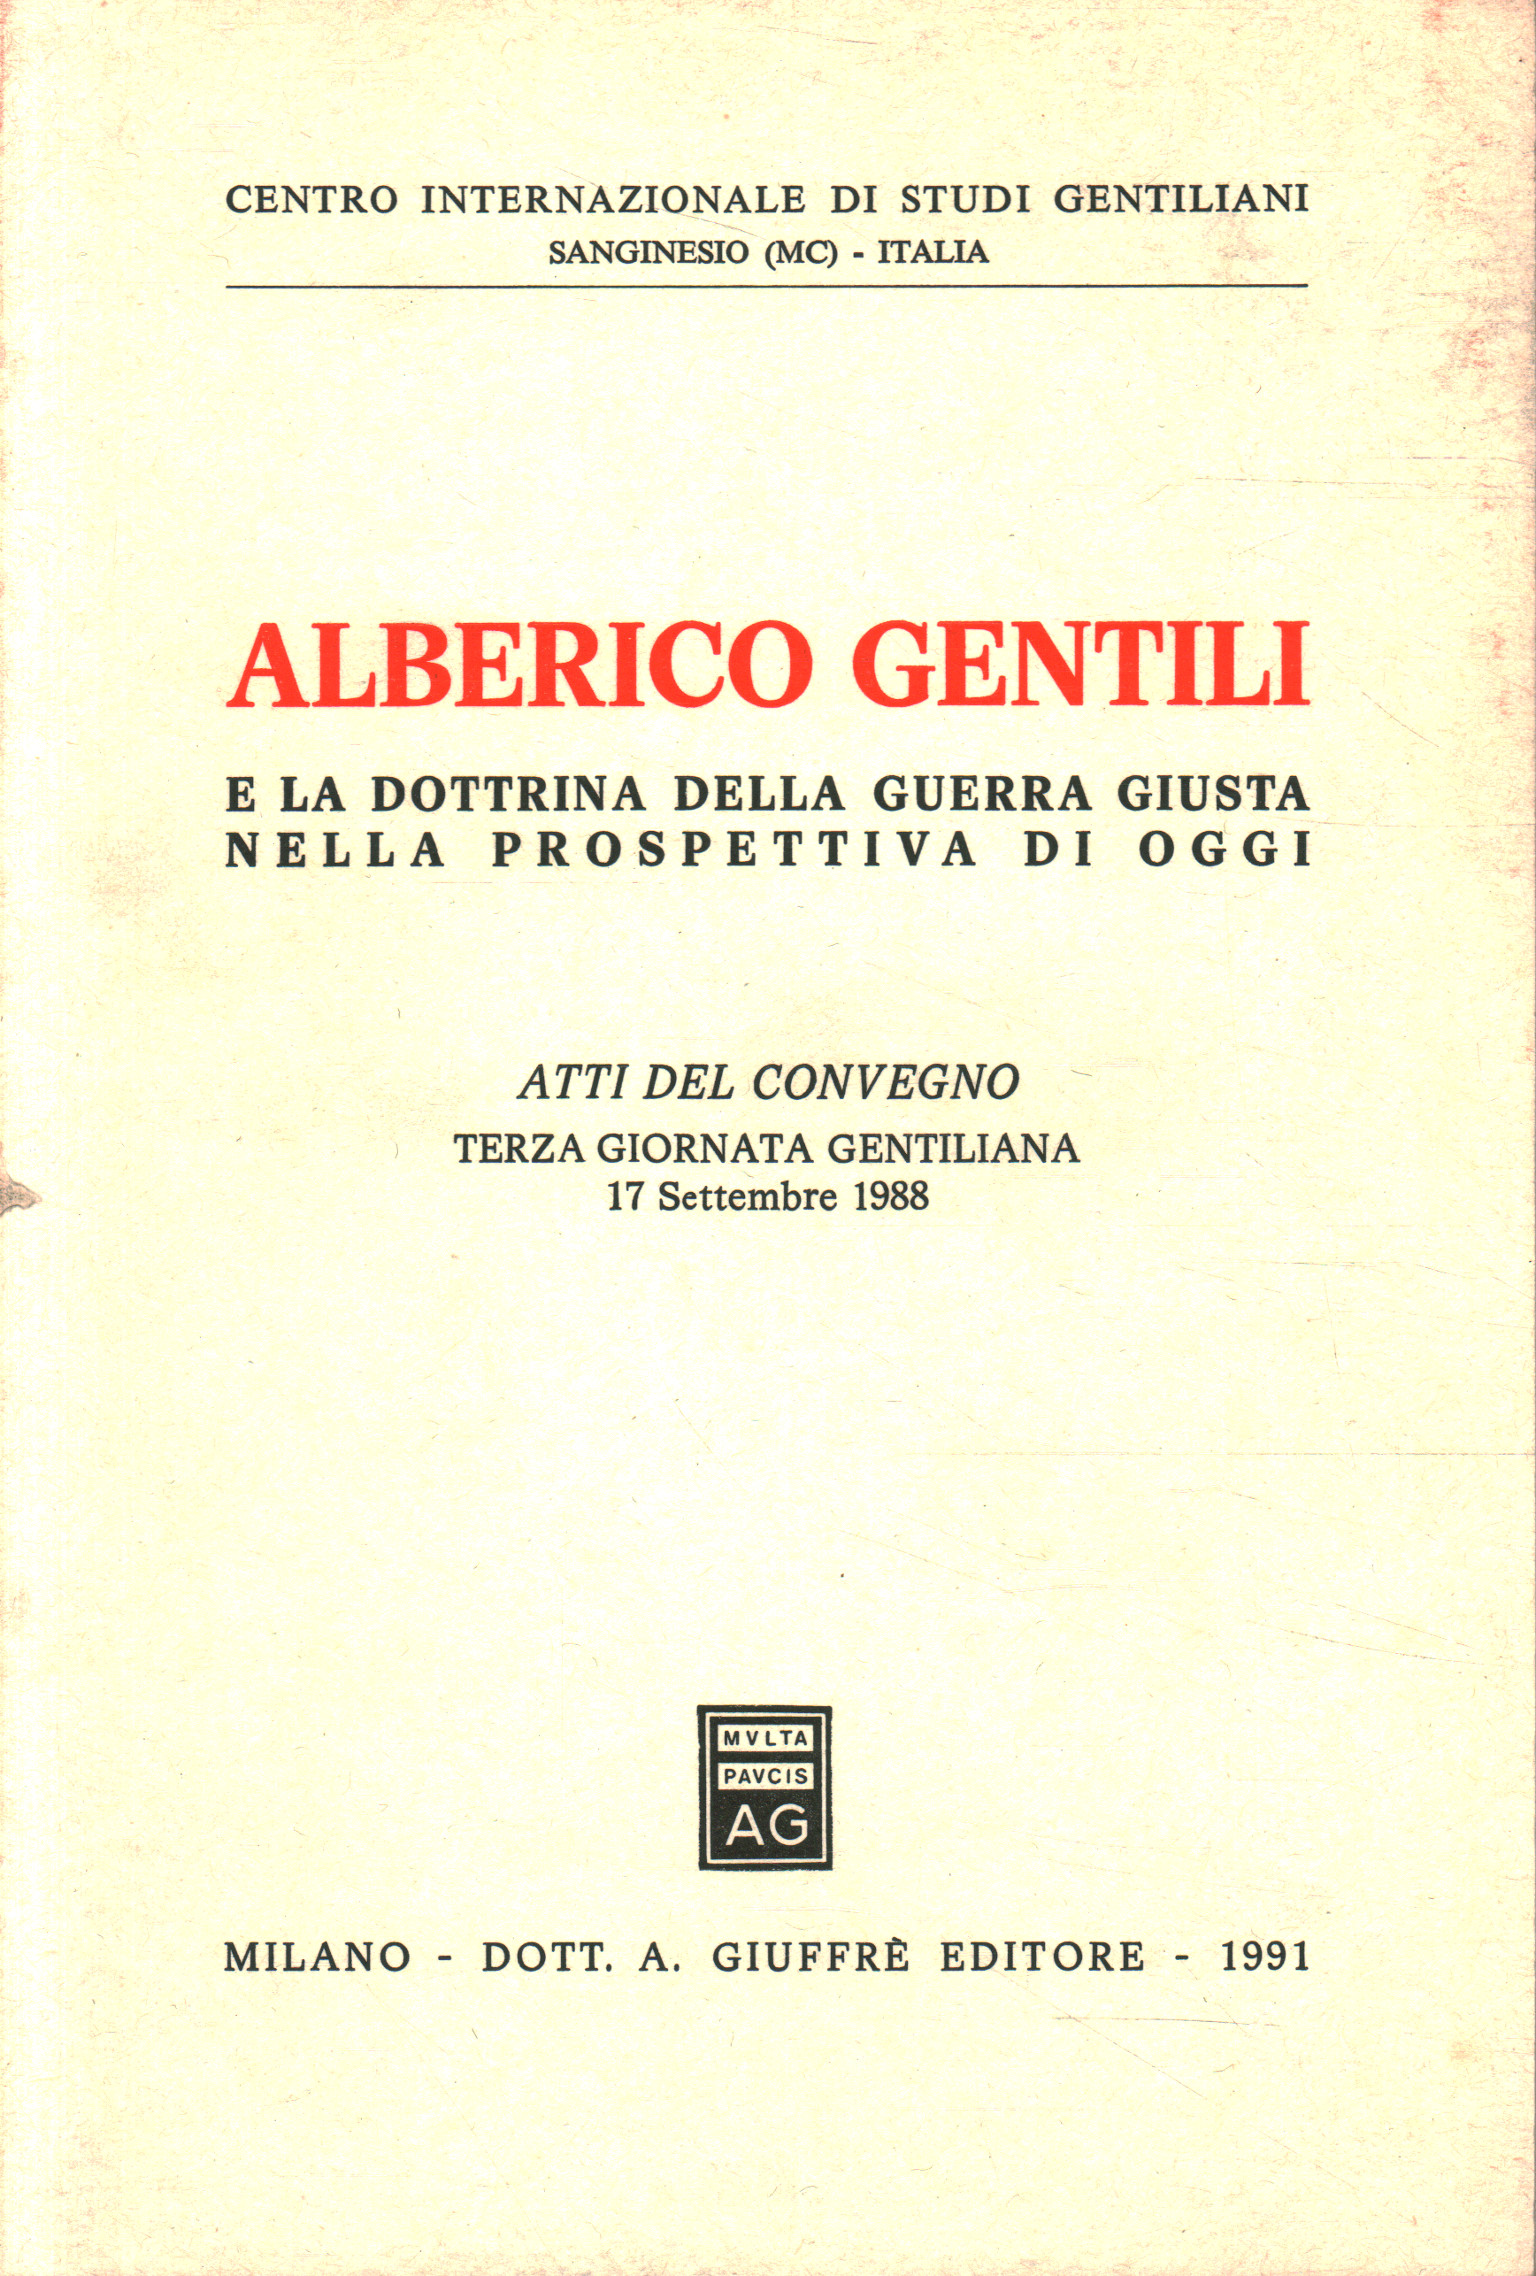 Alberico Gentili and the doctrine of g